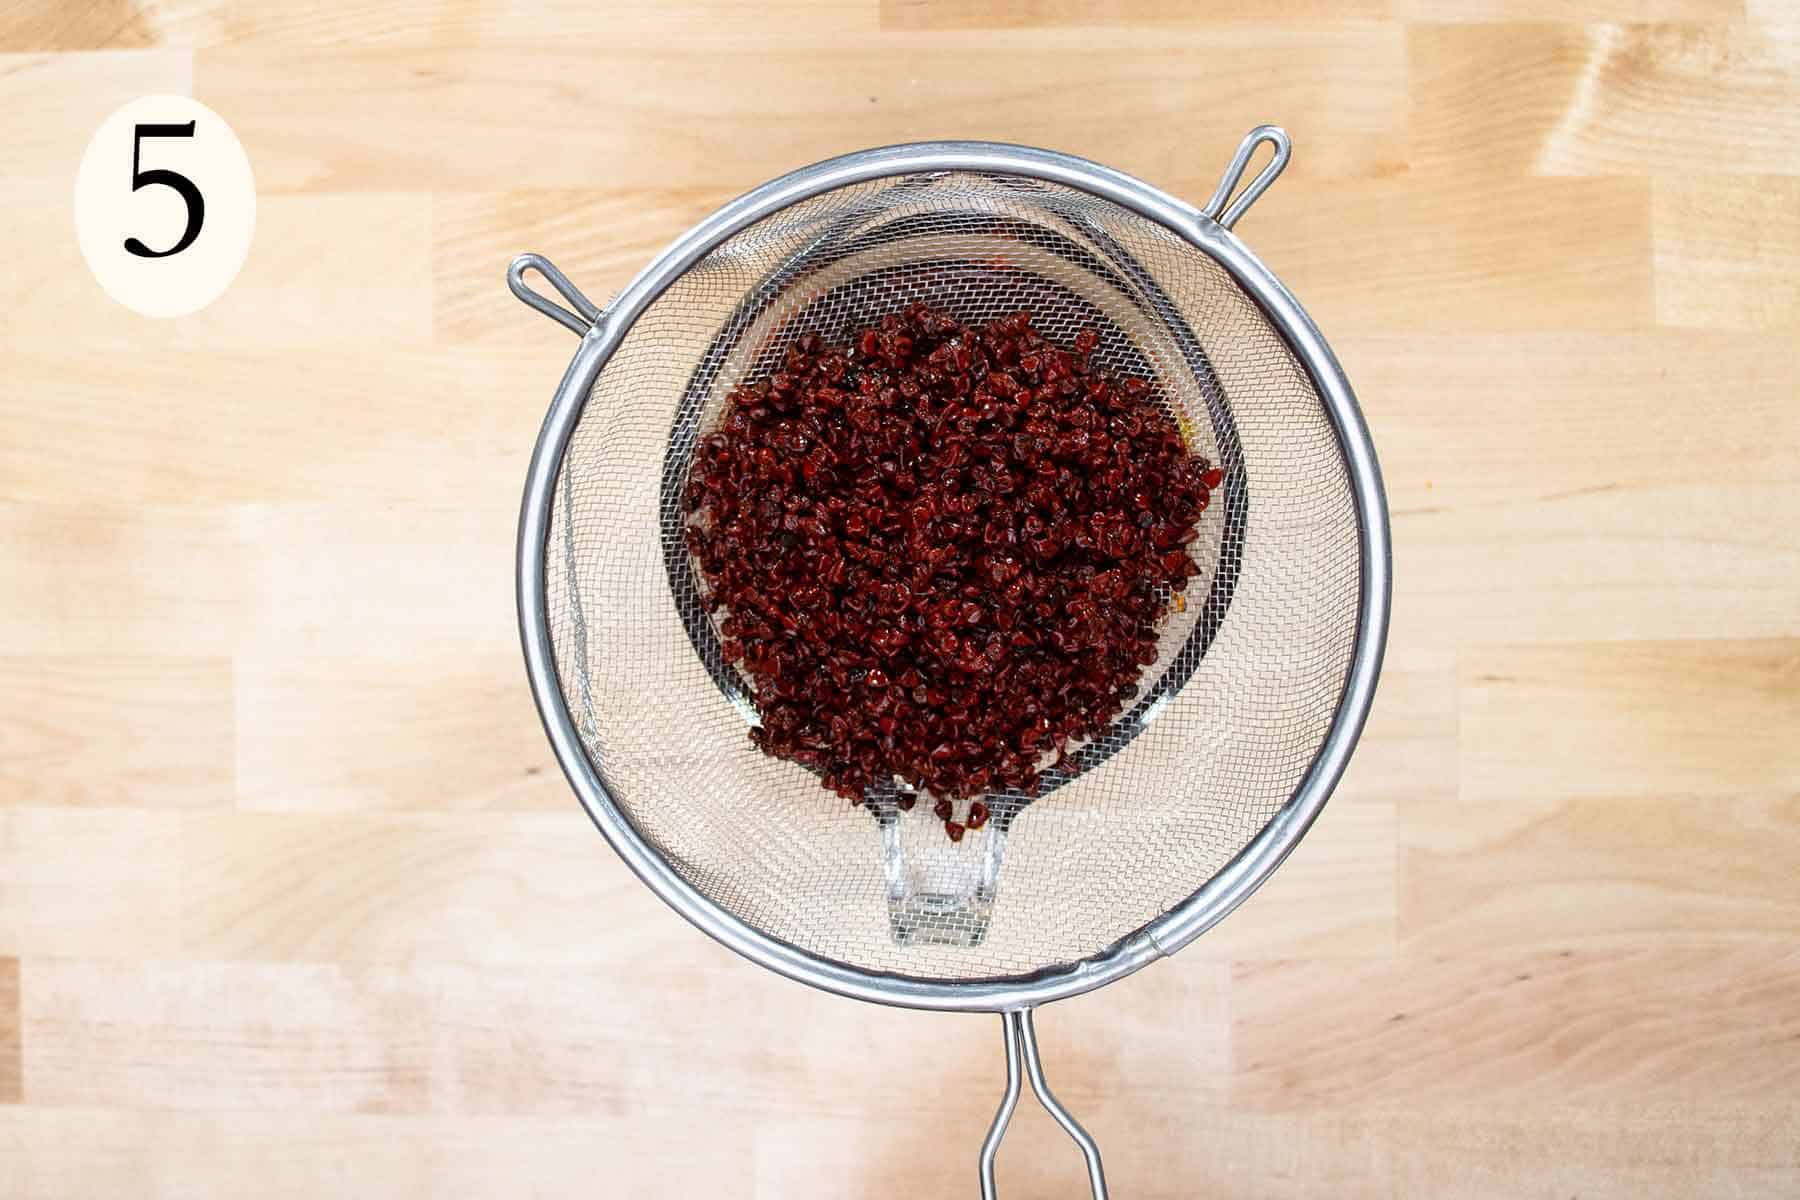 achiote seeds on a strainer.